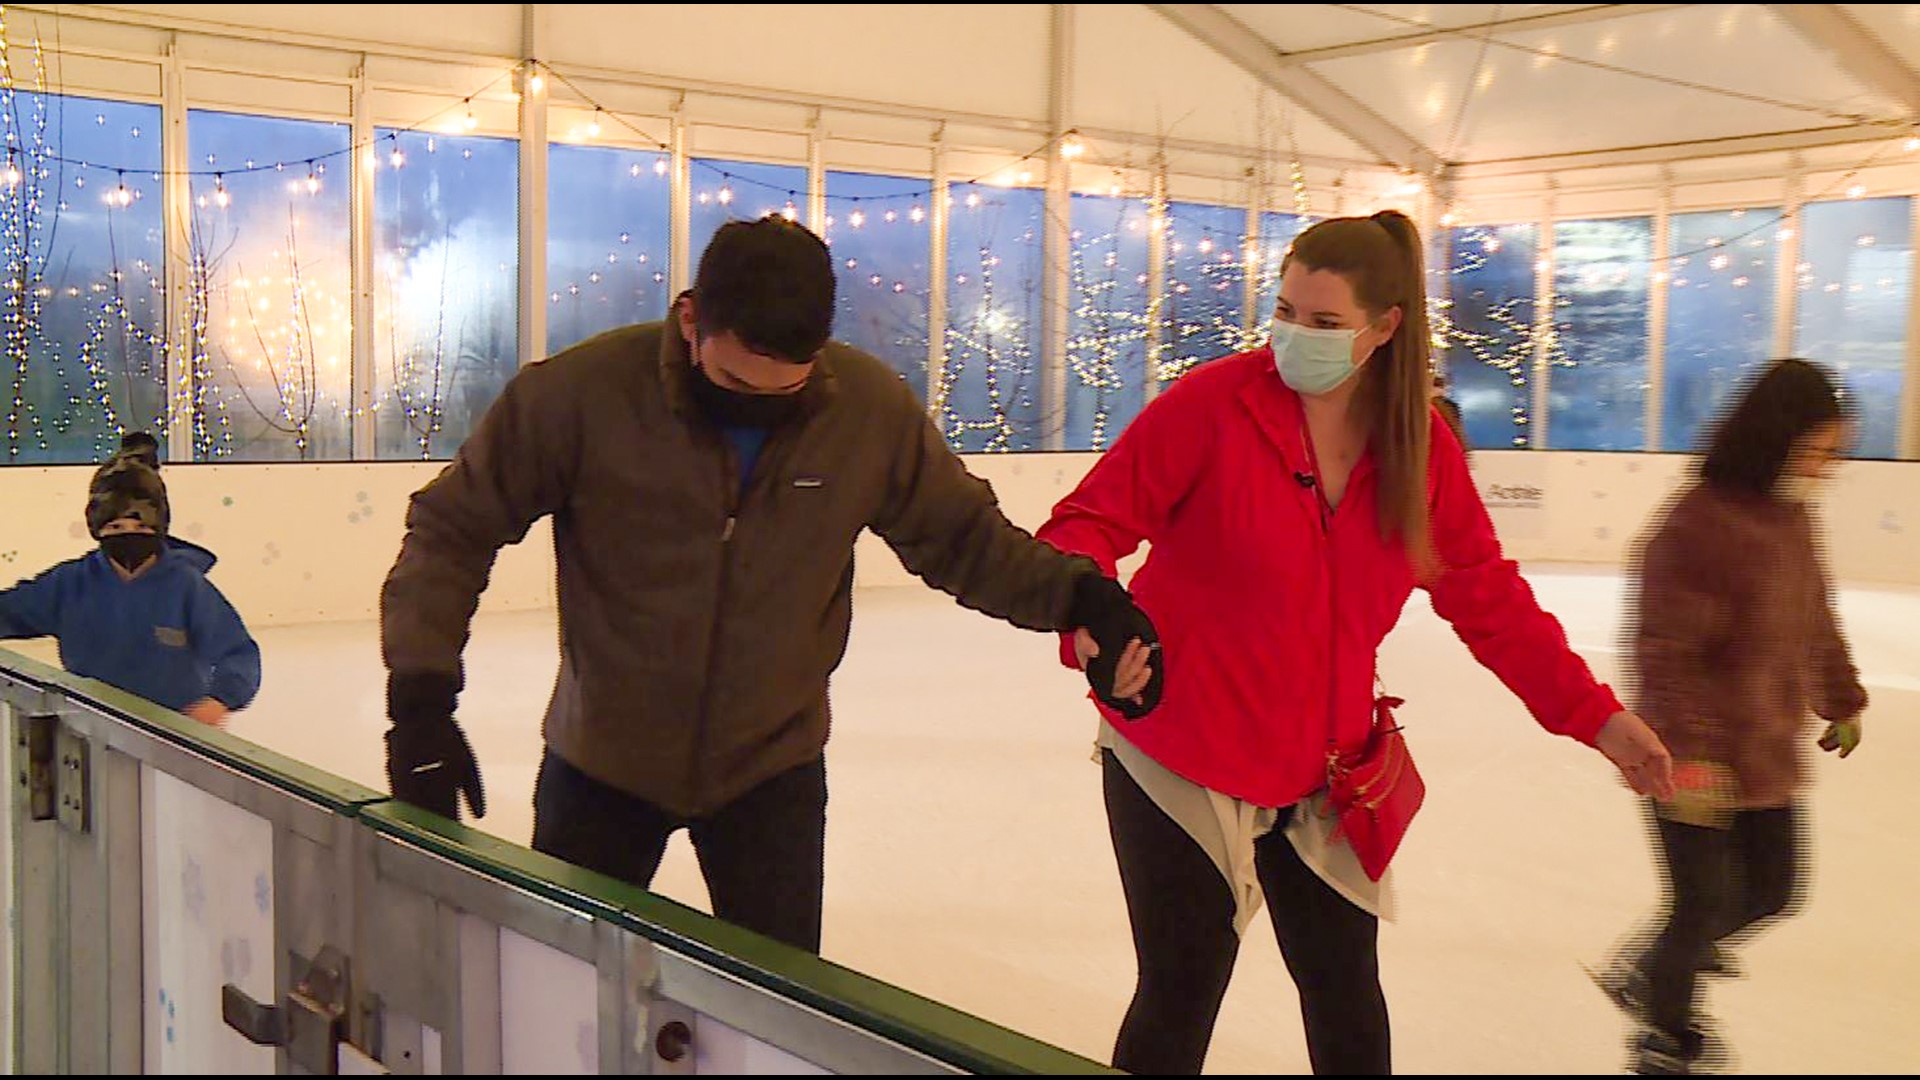 The pop-up skating rink has become a holiday tradition in Olympia. #k5evening